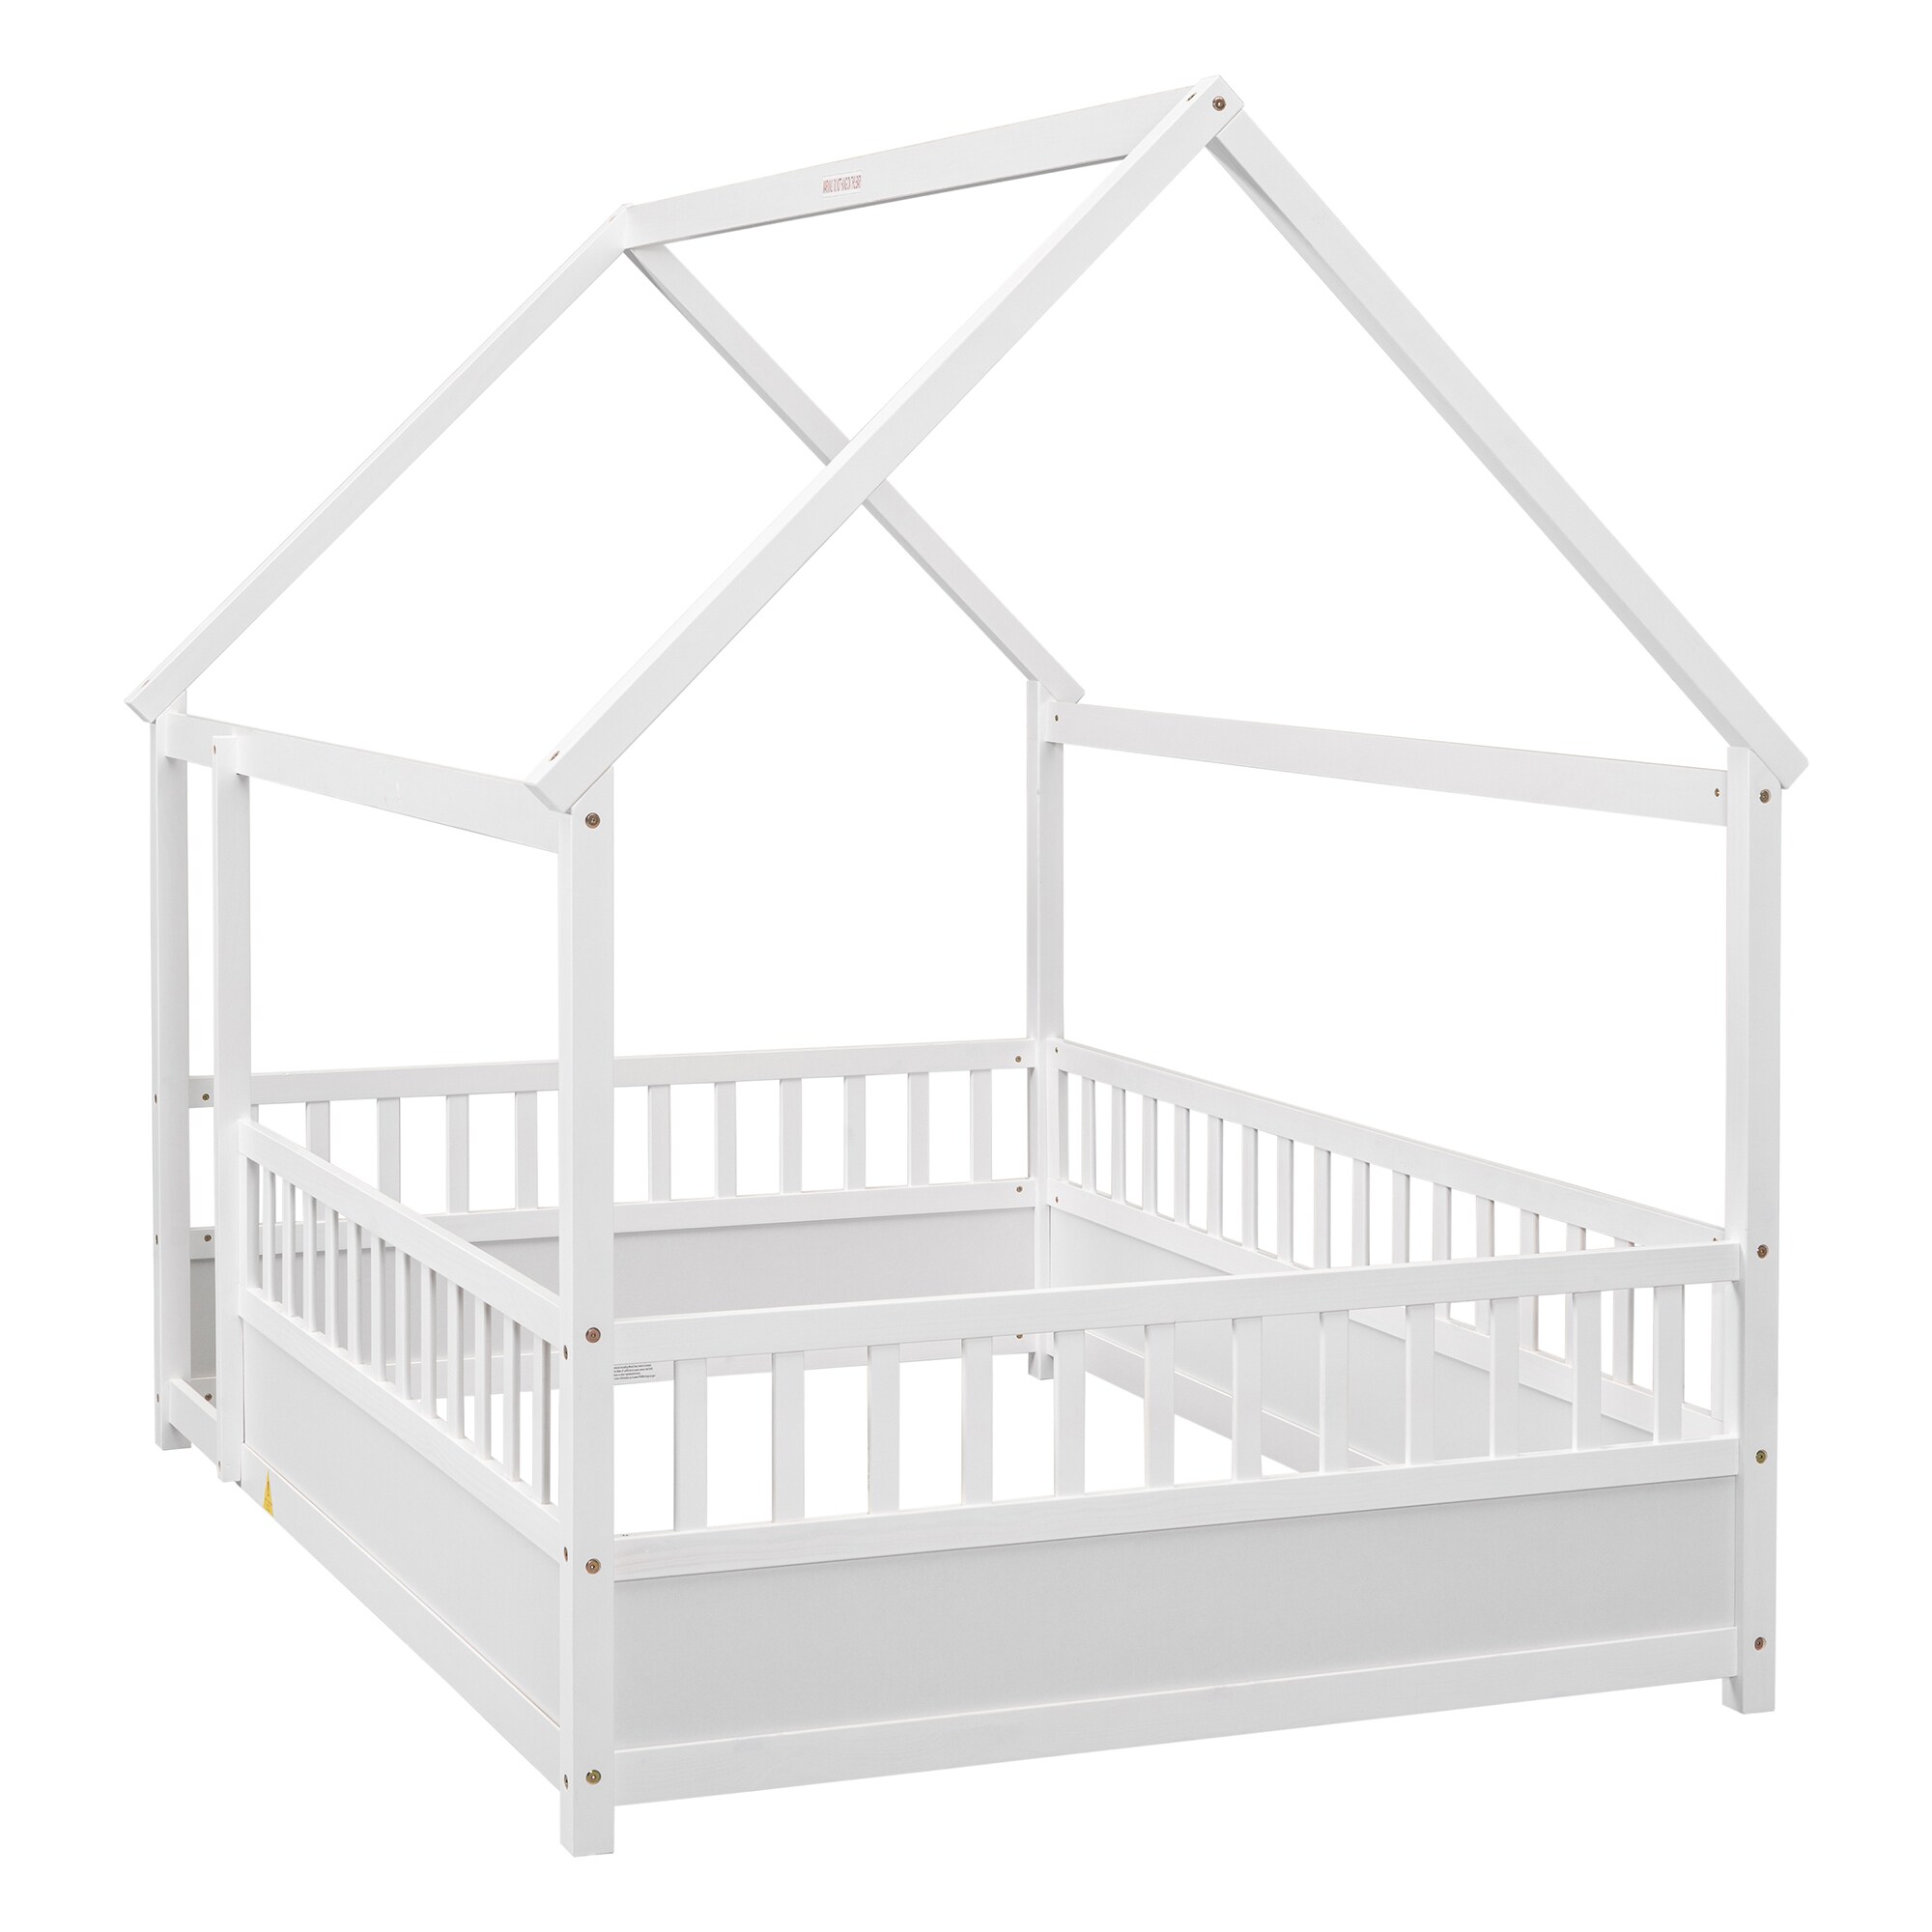 Clihome White Twin Wood Bed Frame in the Beds department at Lowes.com